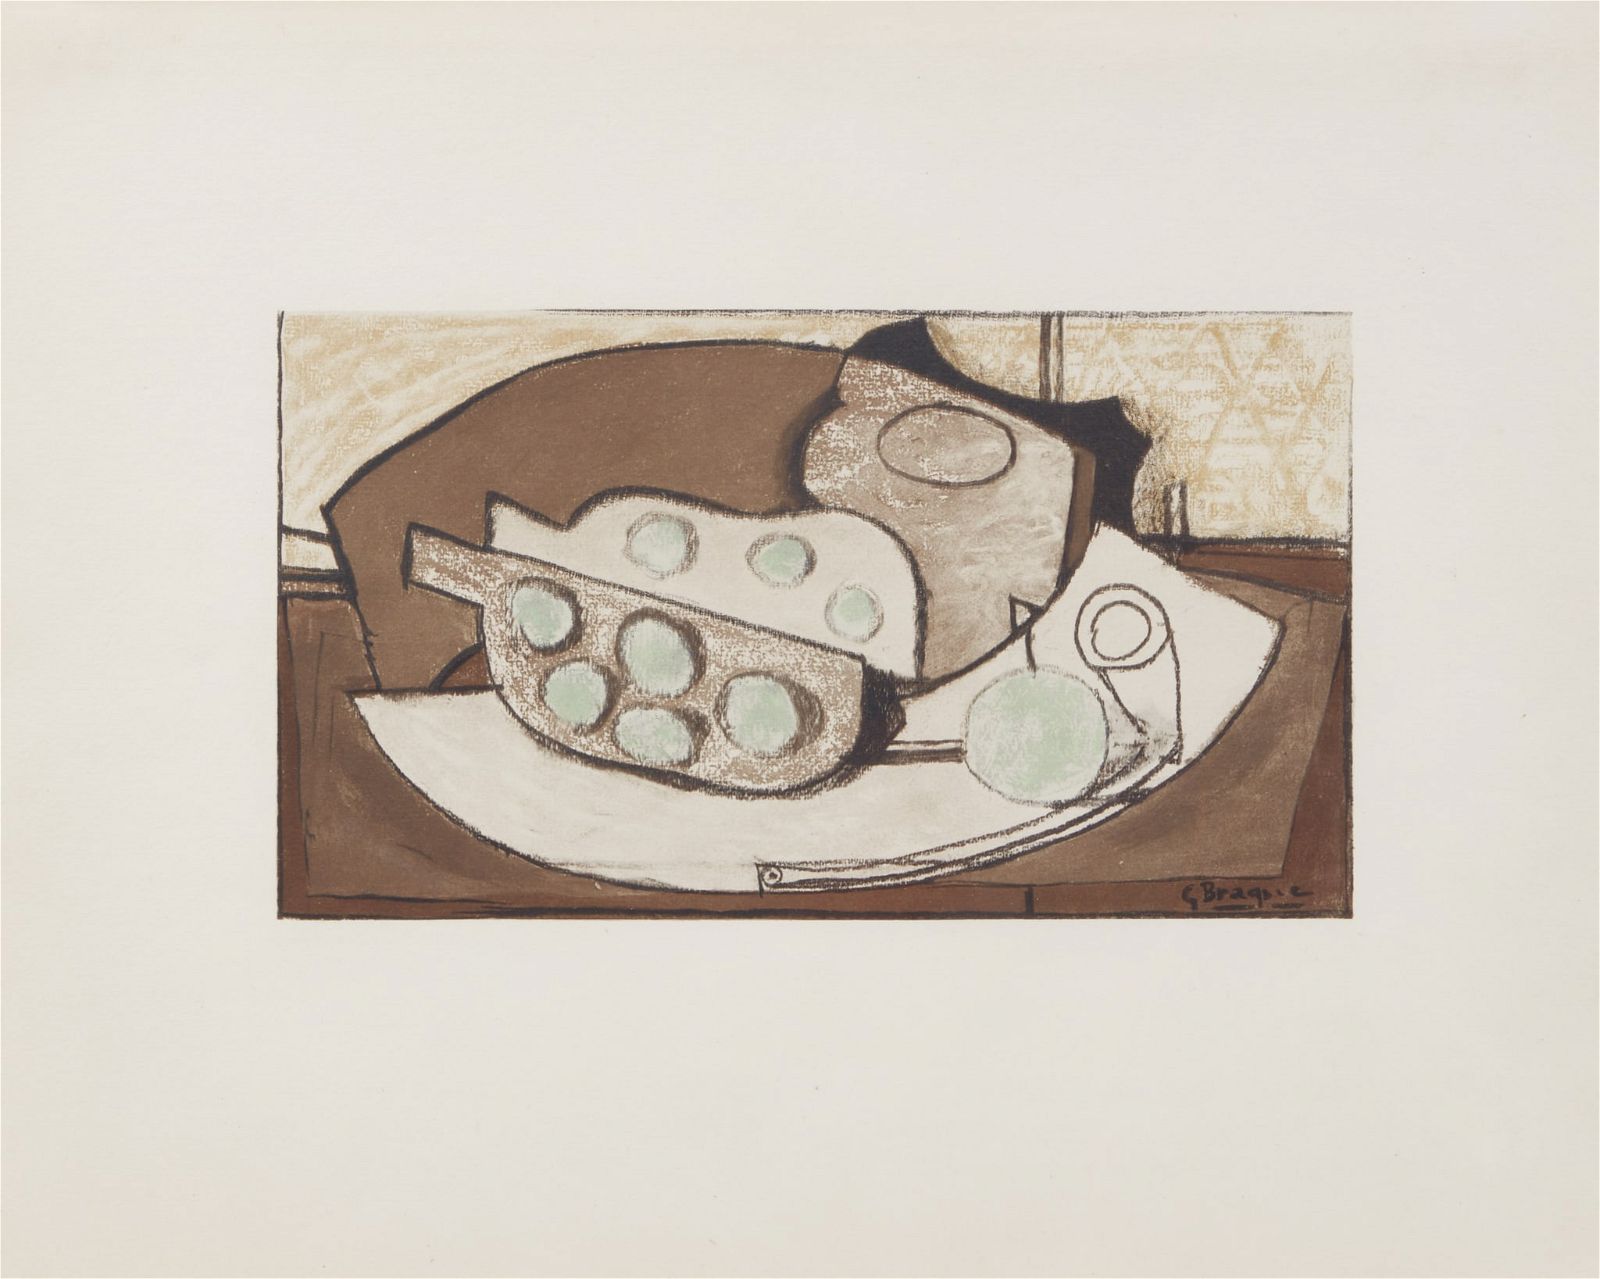 AFTER GEORGES BRAQUE, GRENADE ET PIPE,